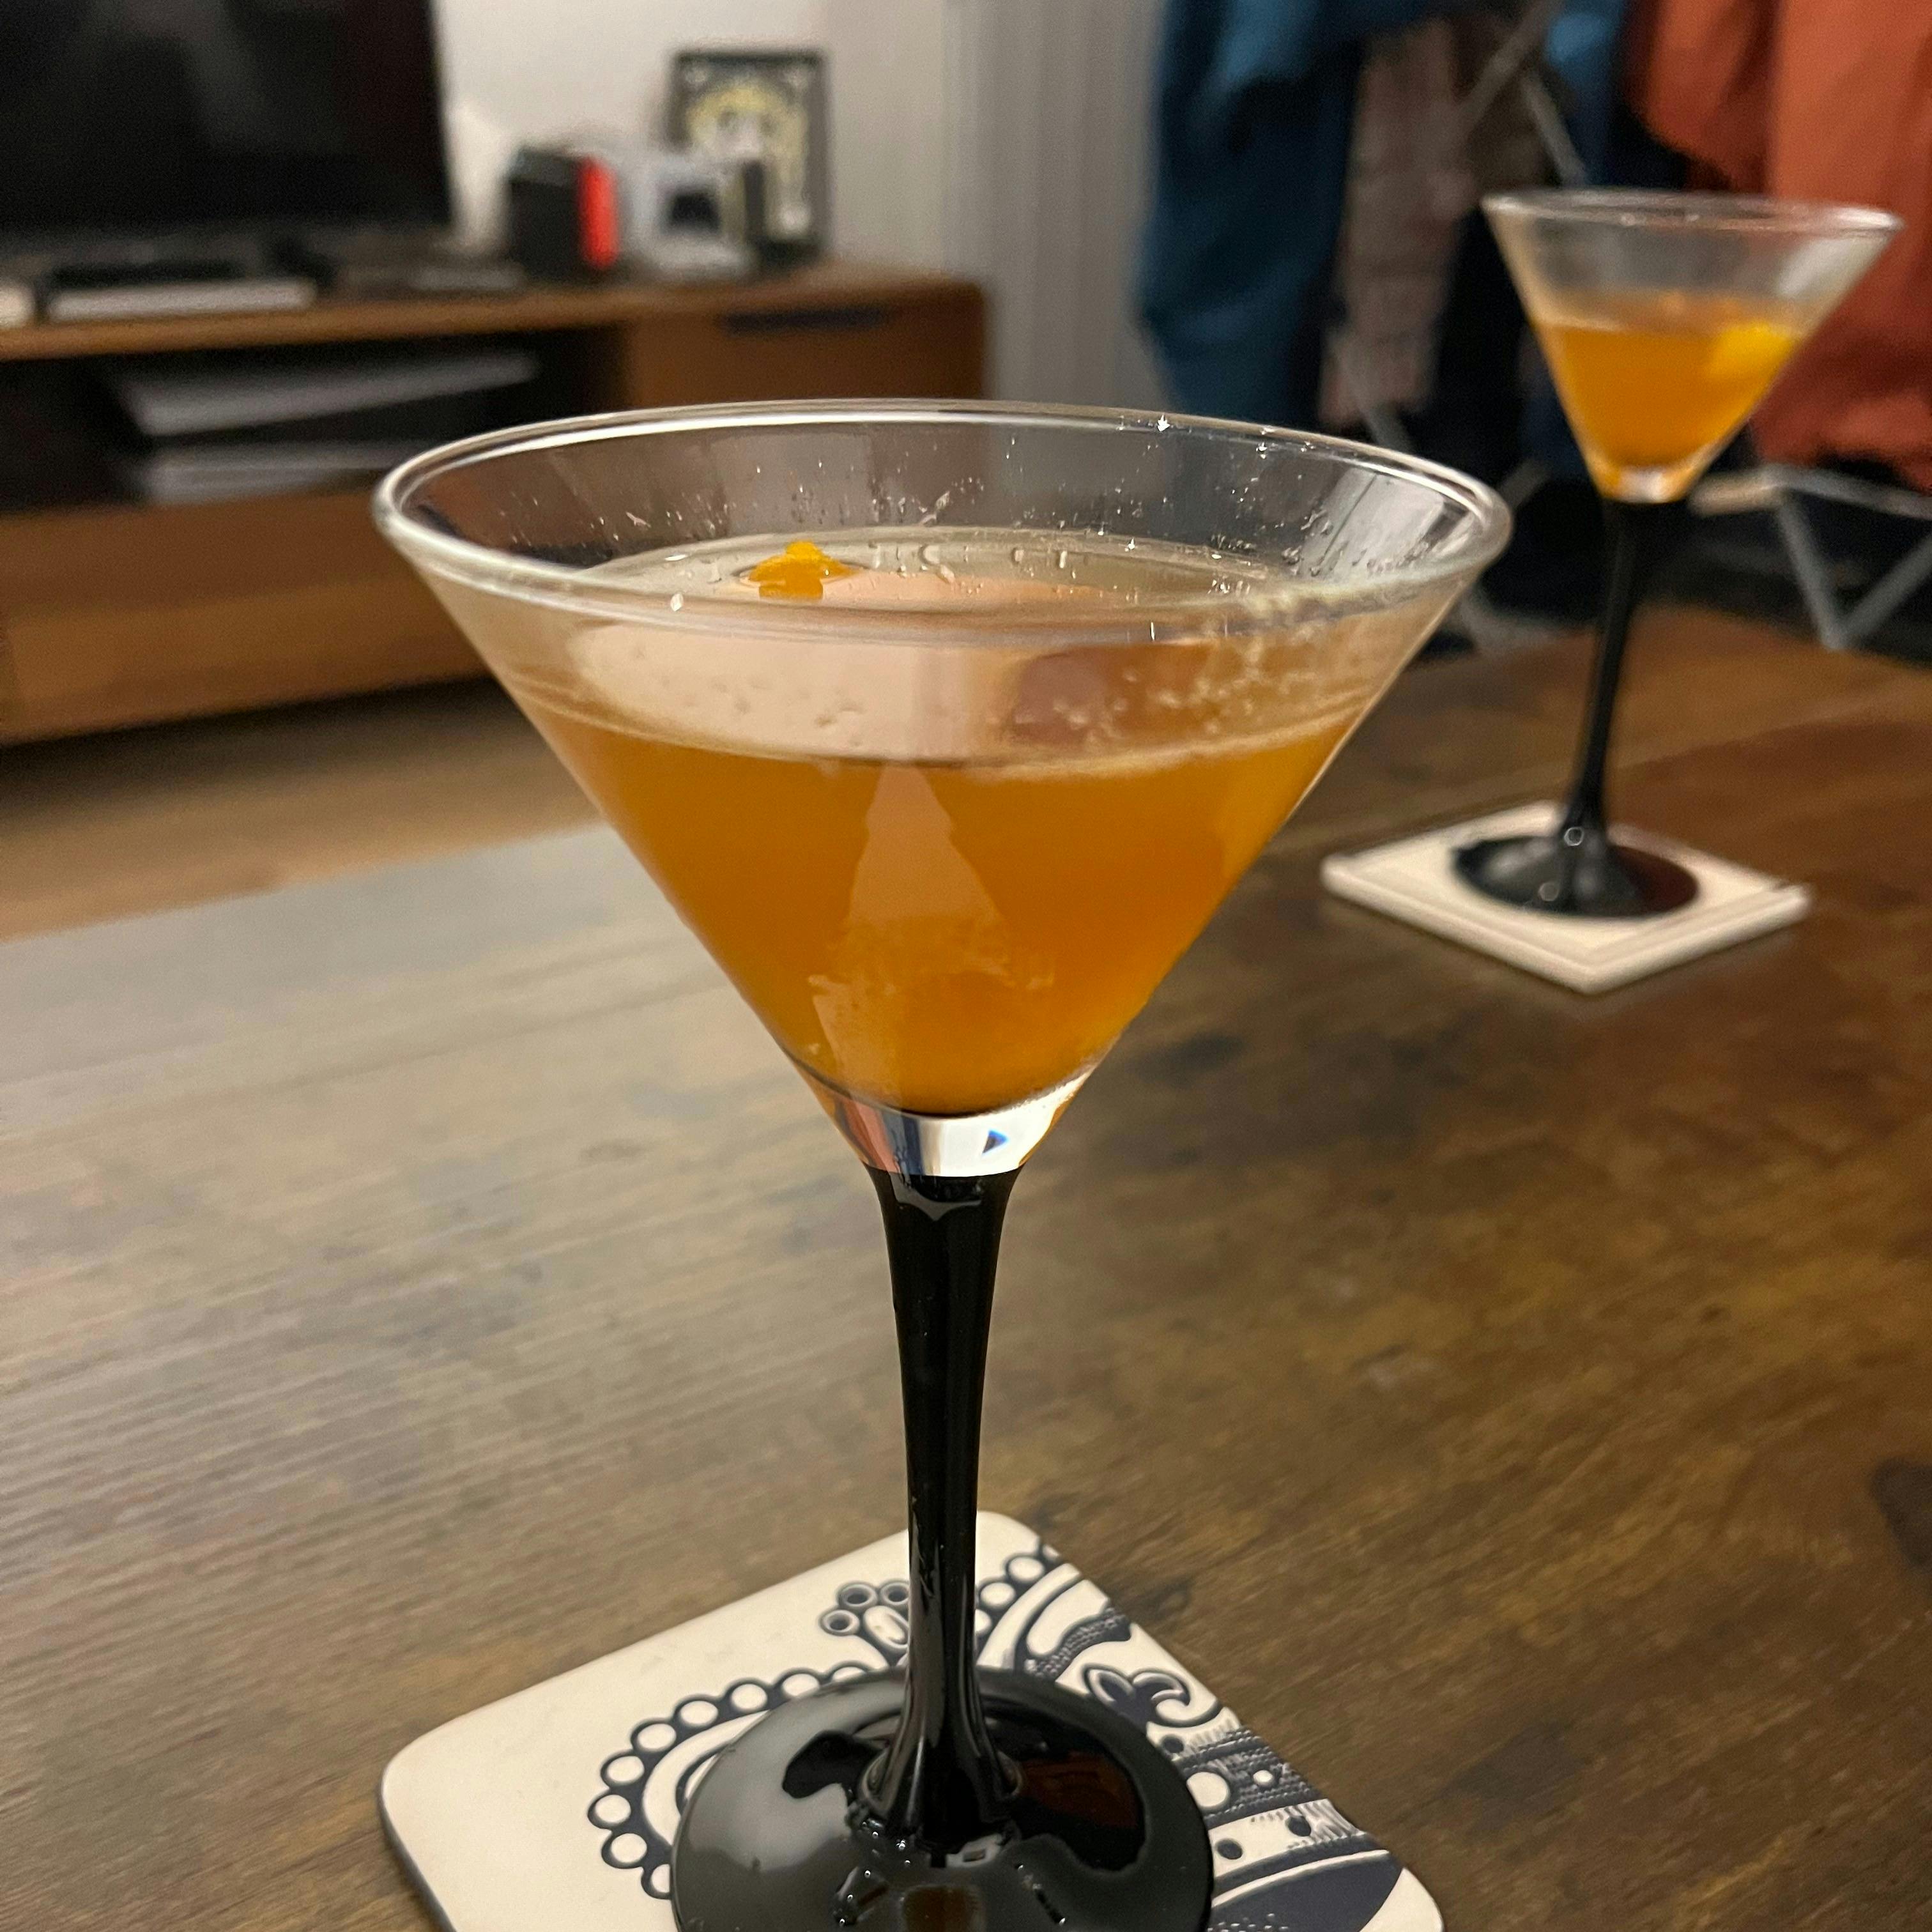 A new space cocktail